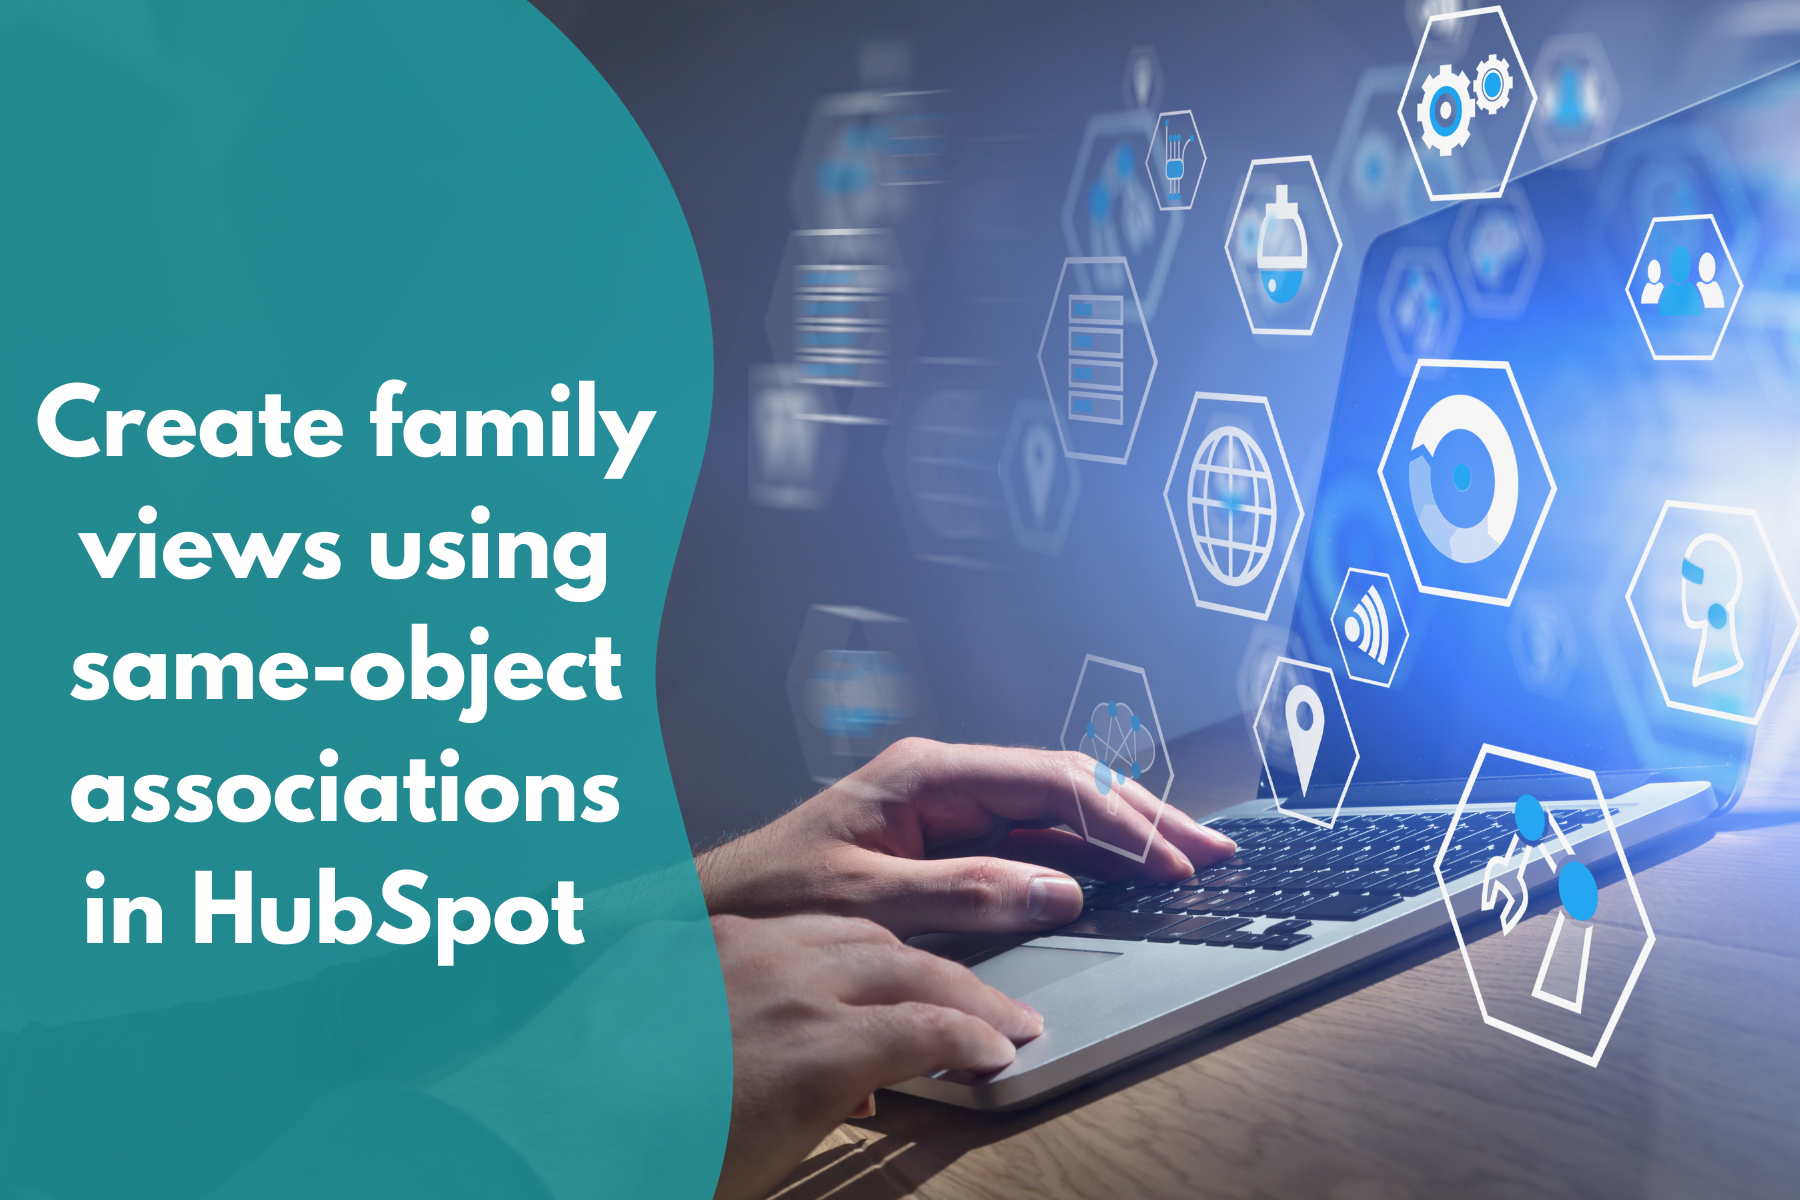 Create family views using same-object associations in HubSpot